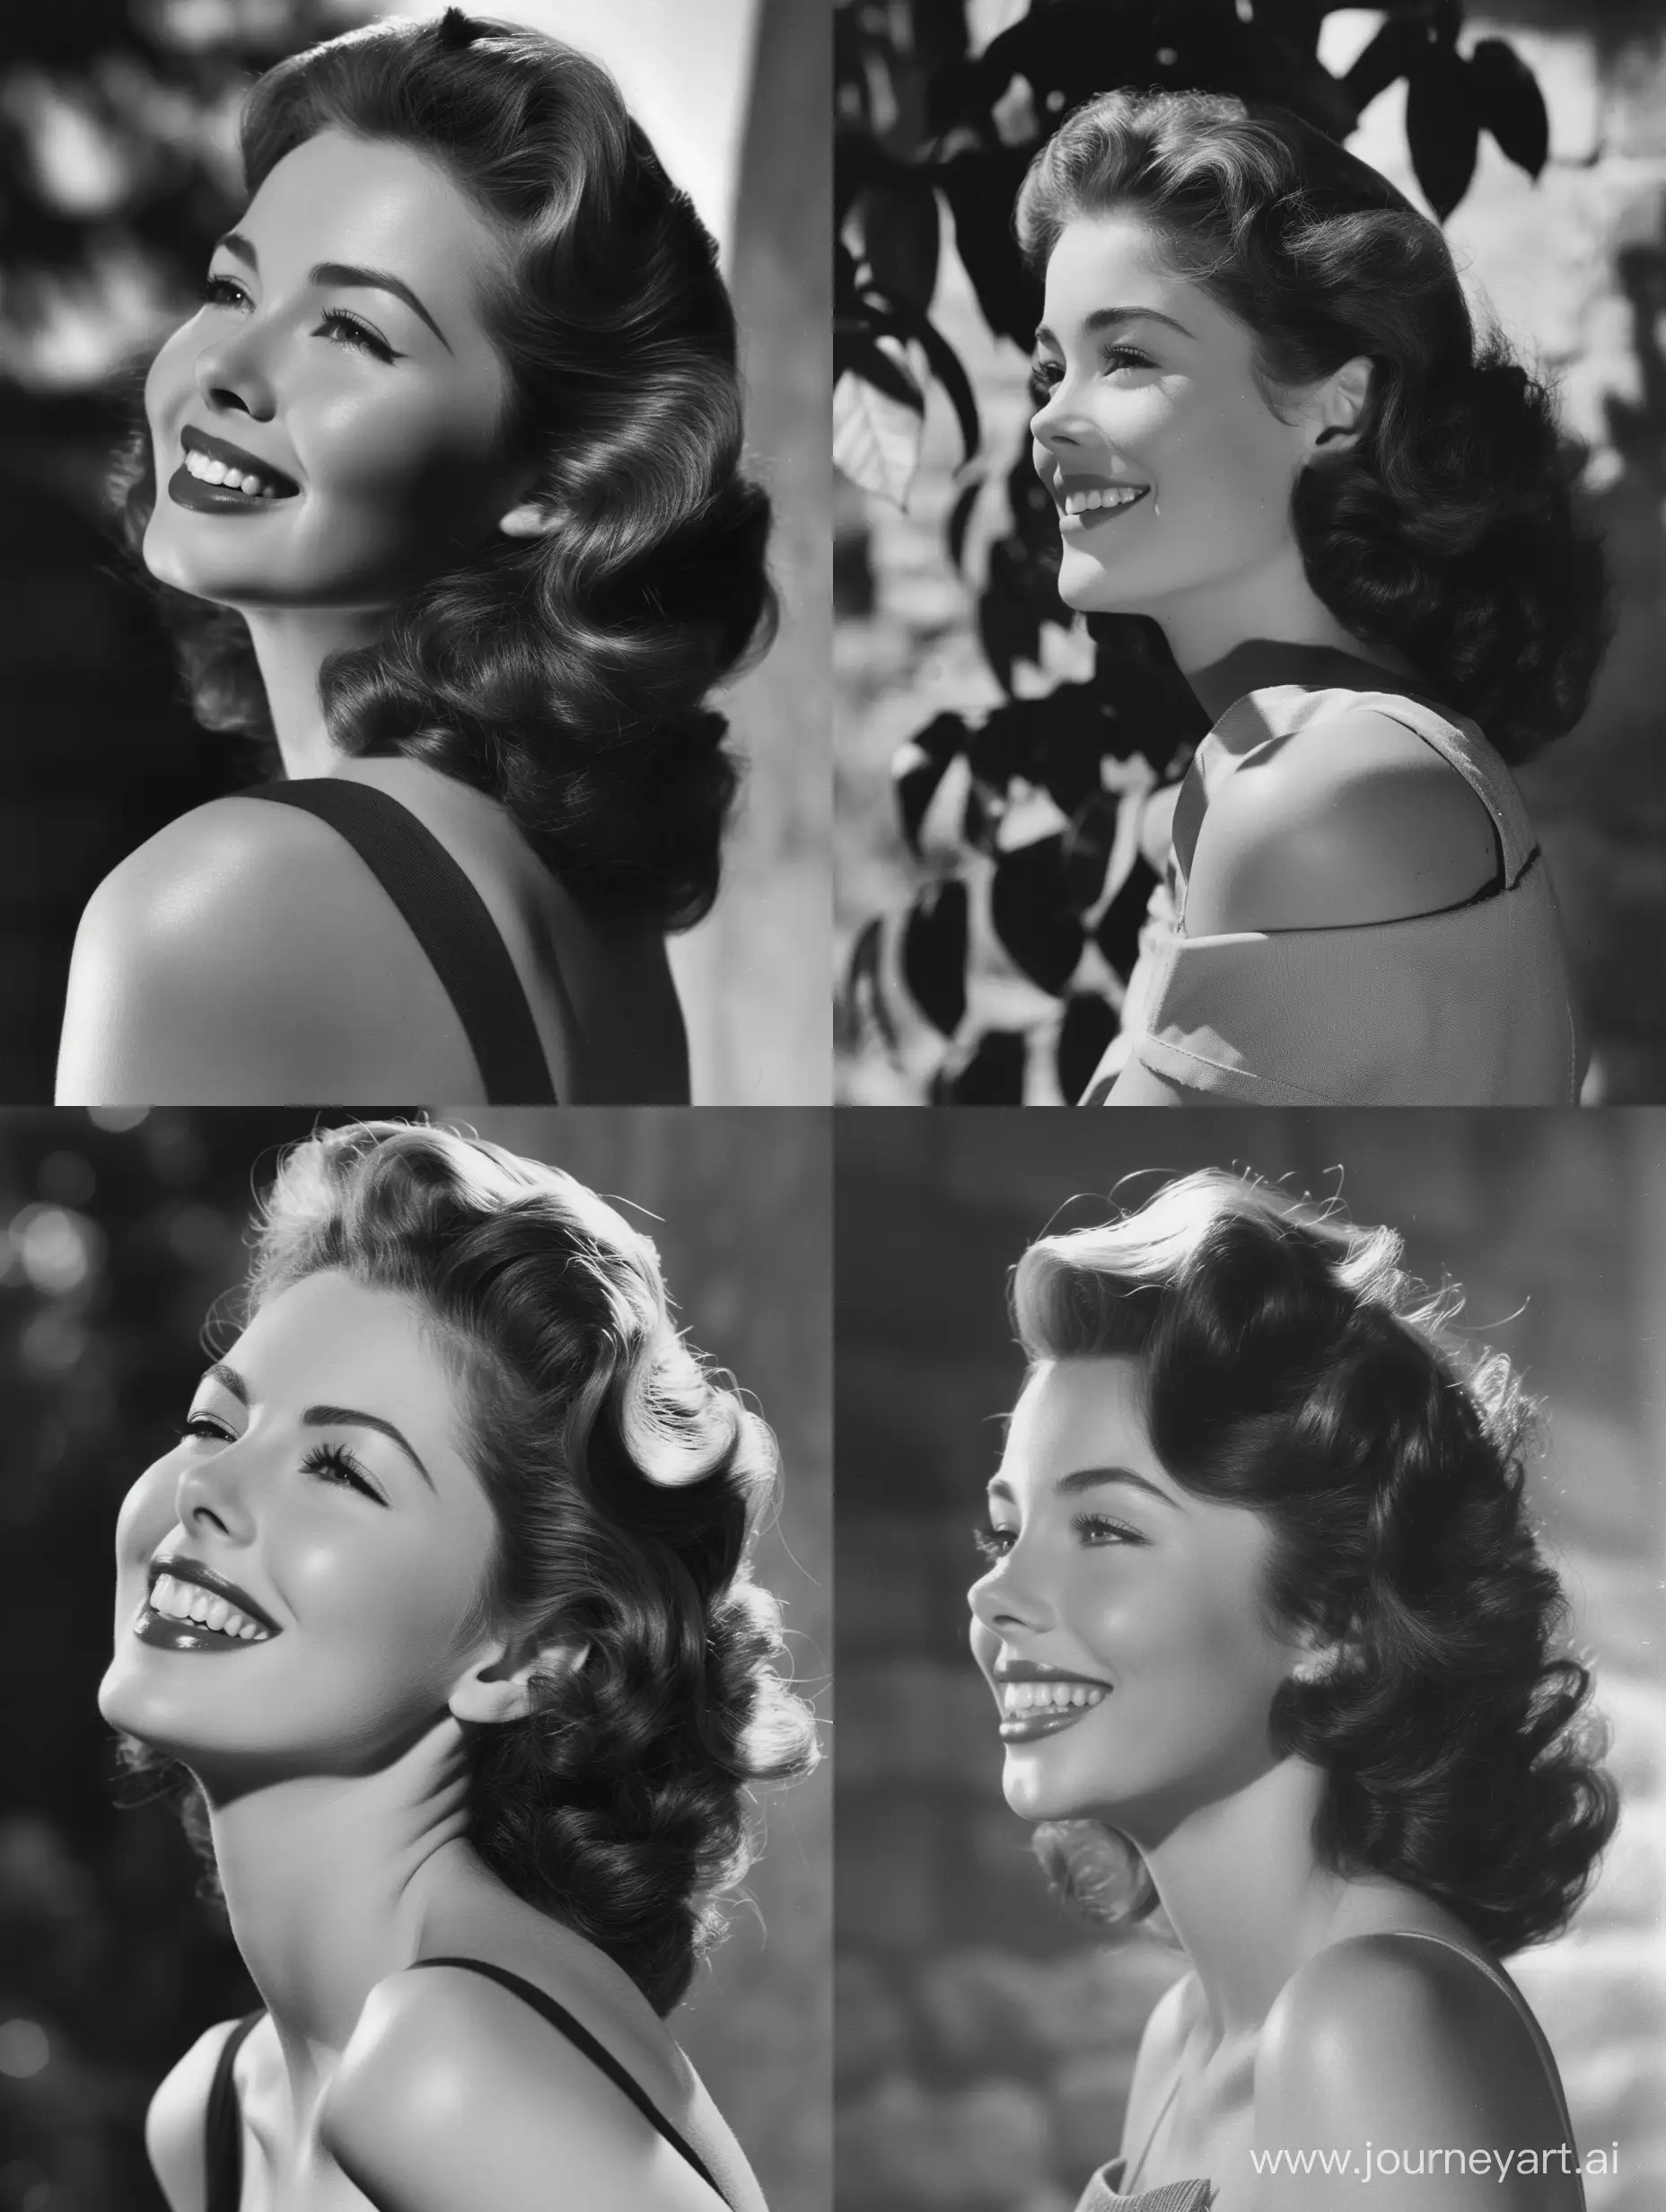 Smiling-1950s-Woman-with-Curly-Hair-in-Black-and-White-Portrait